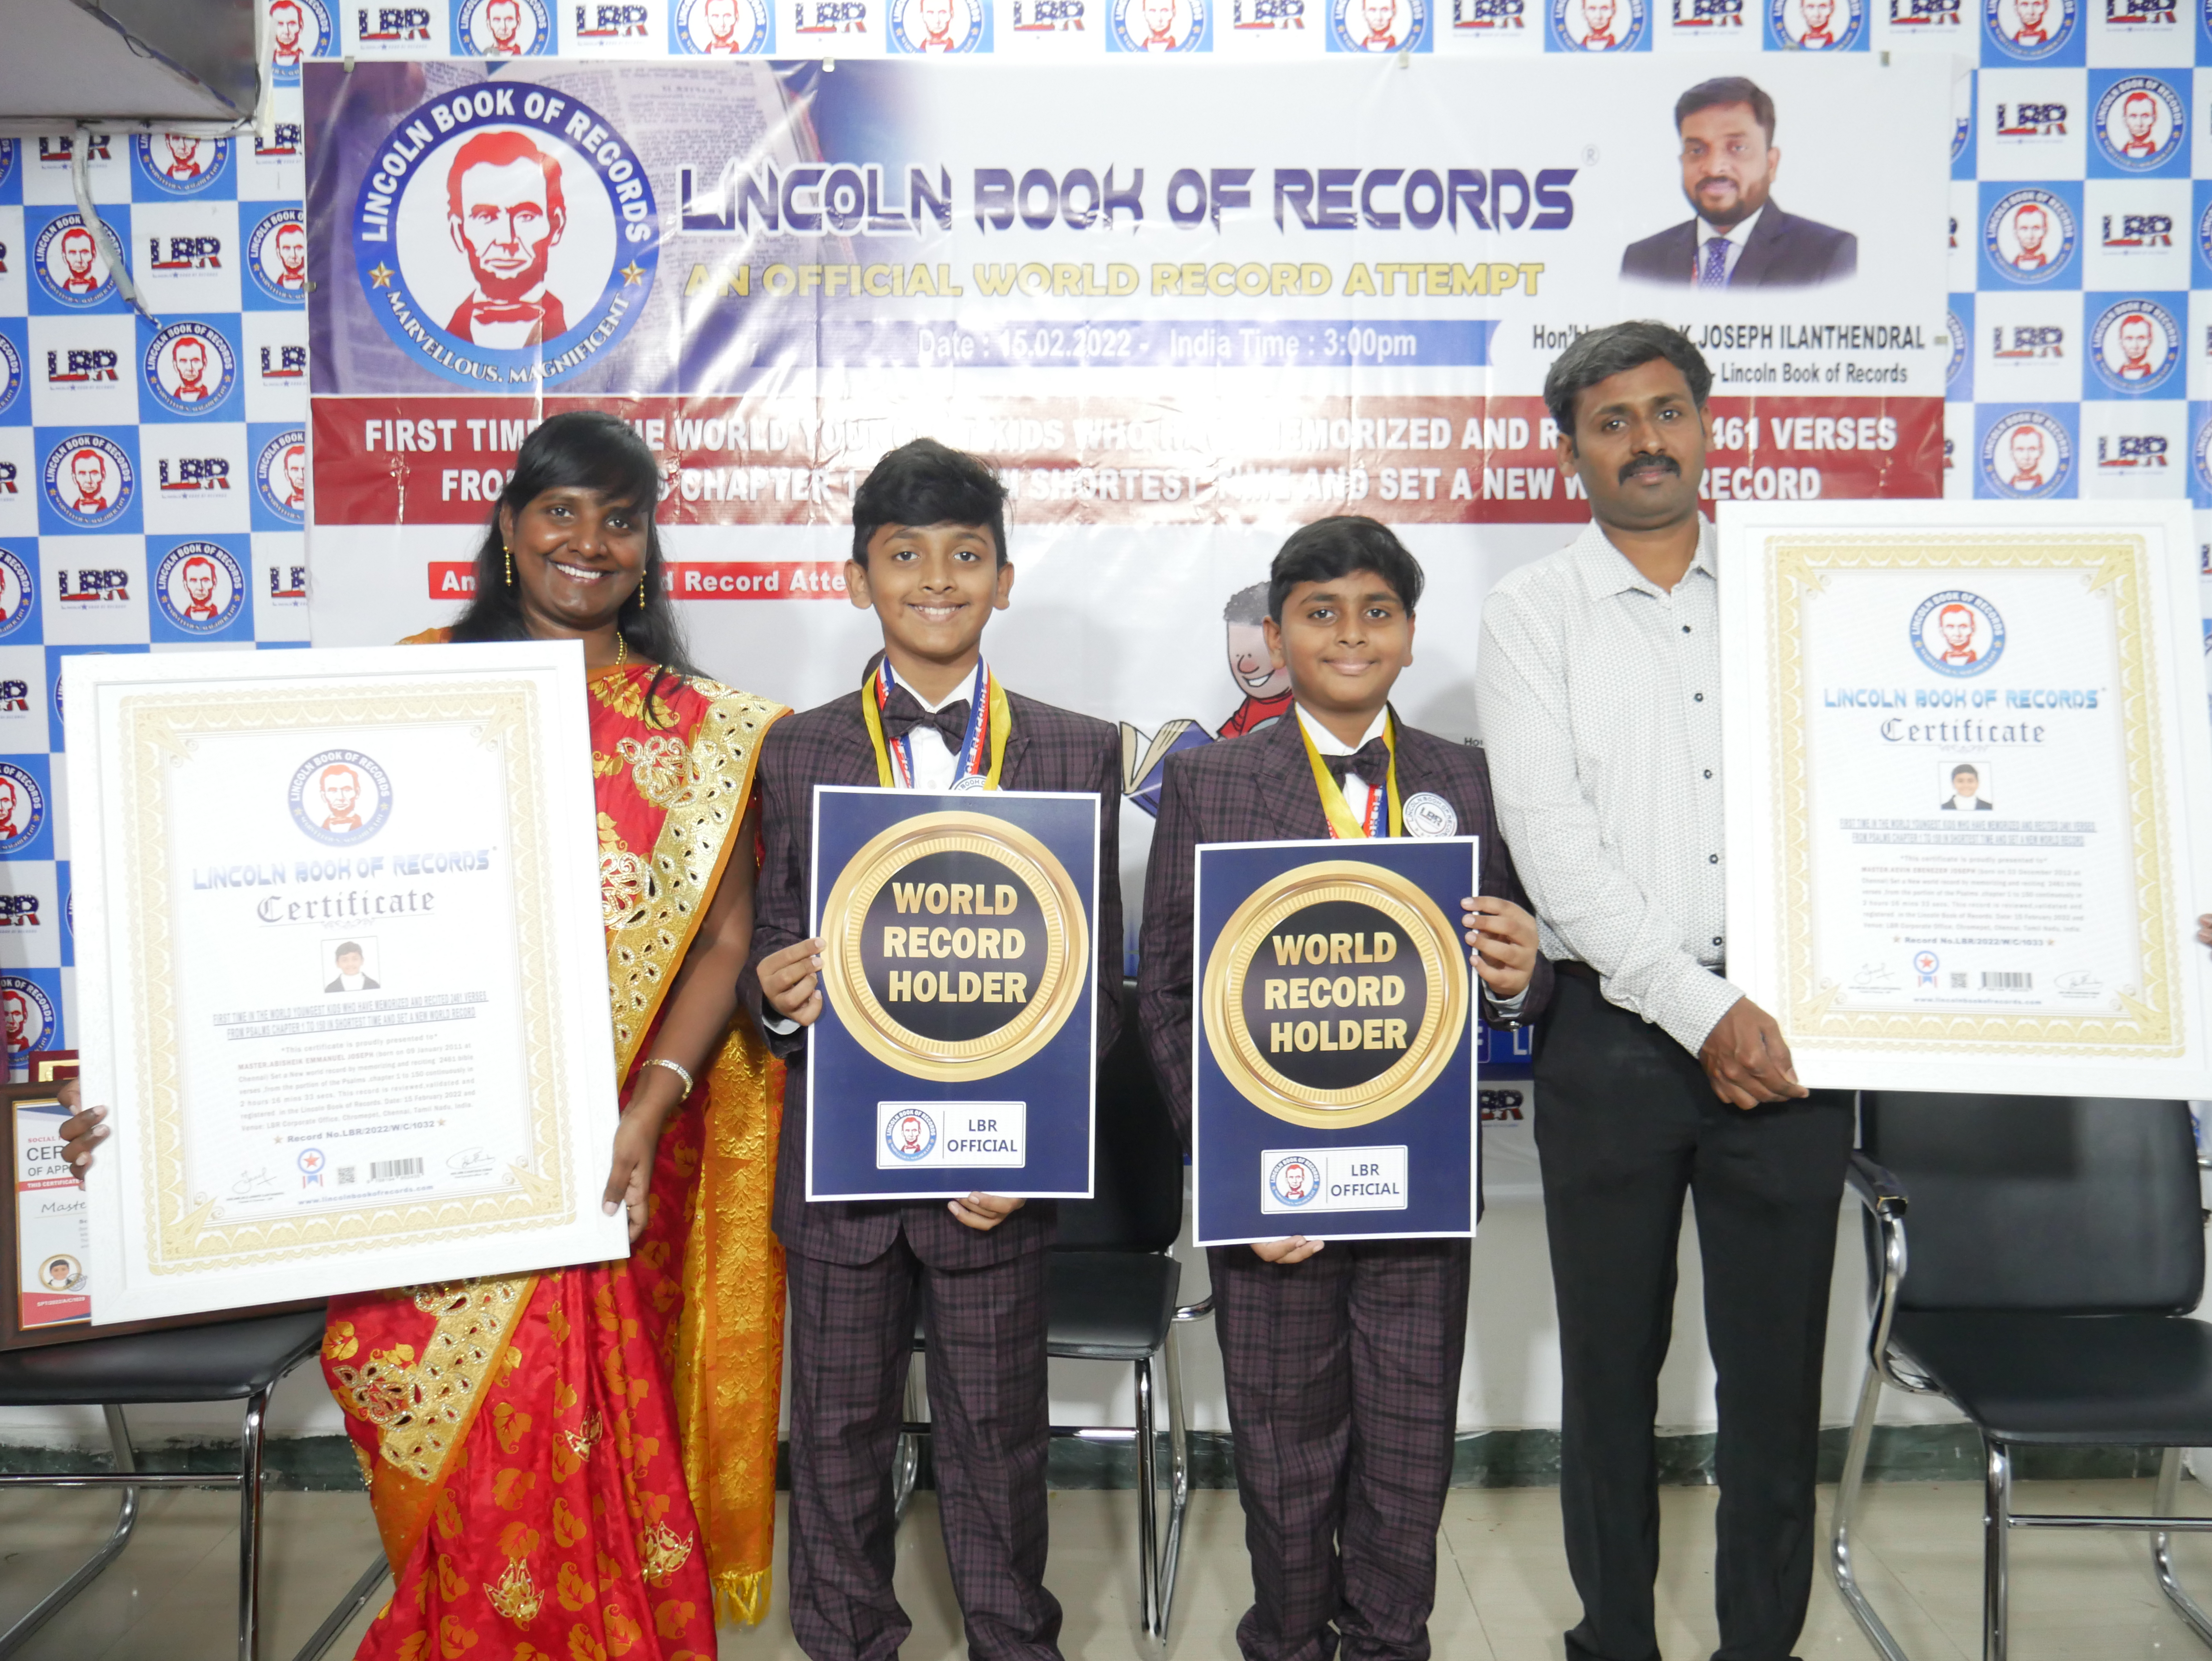 First time in the world youngest Kids who have memorized and recited 2461 Verses  from Psalms chapter 1 to 150 in shortest time and set a New World record